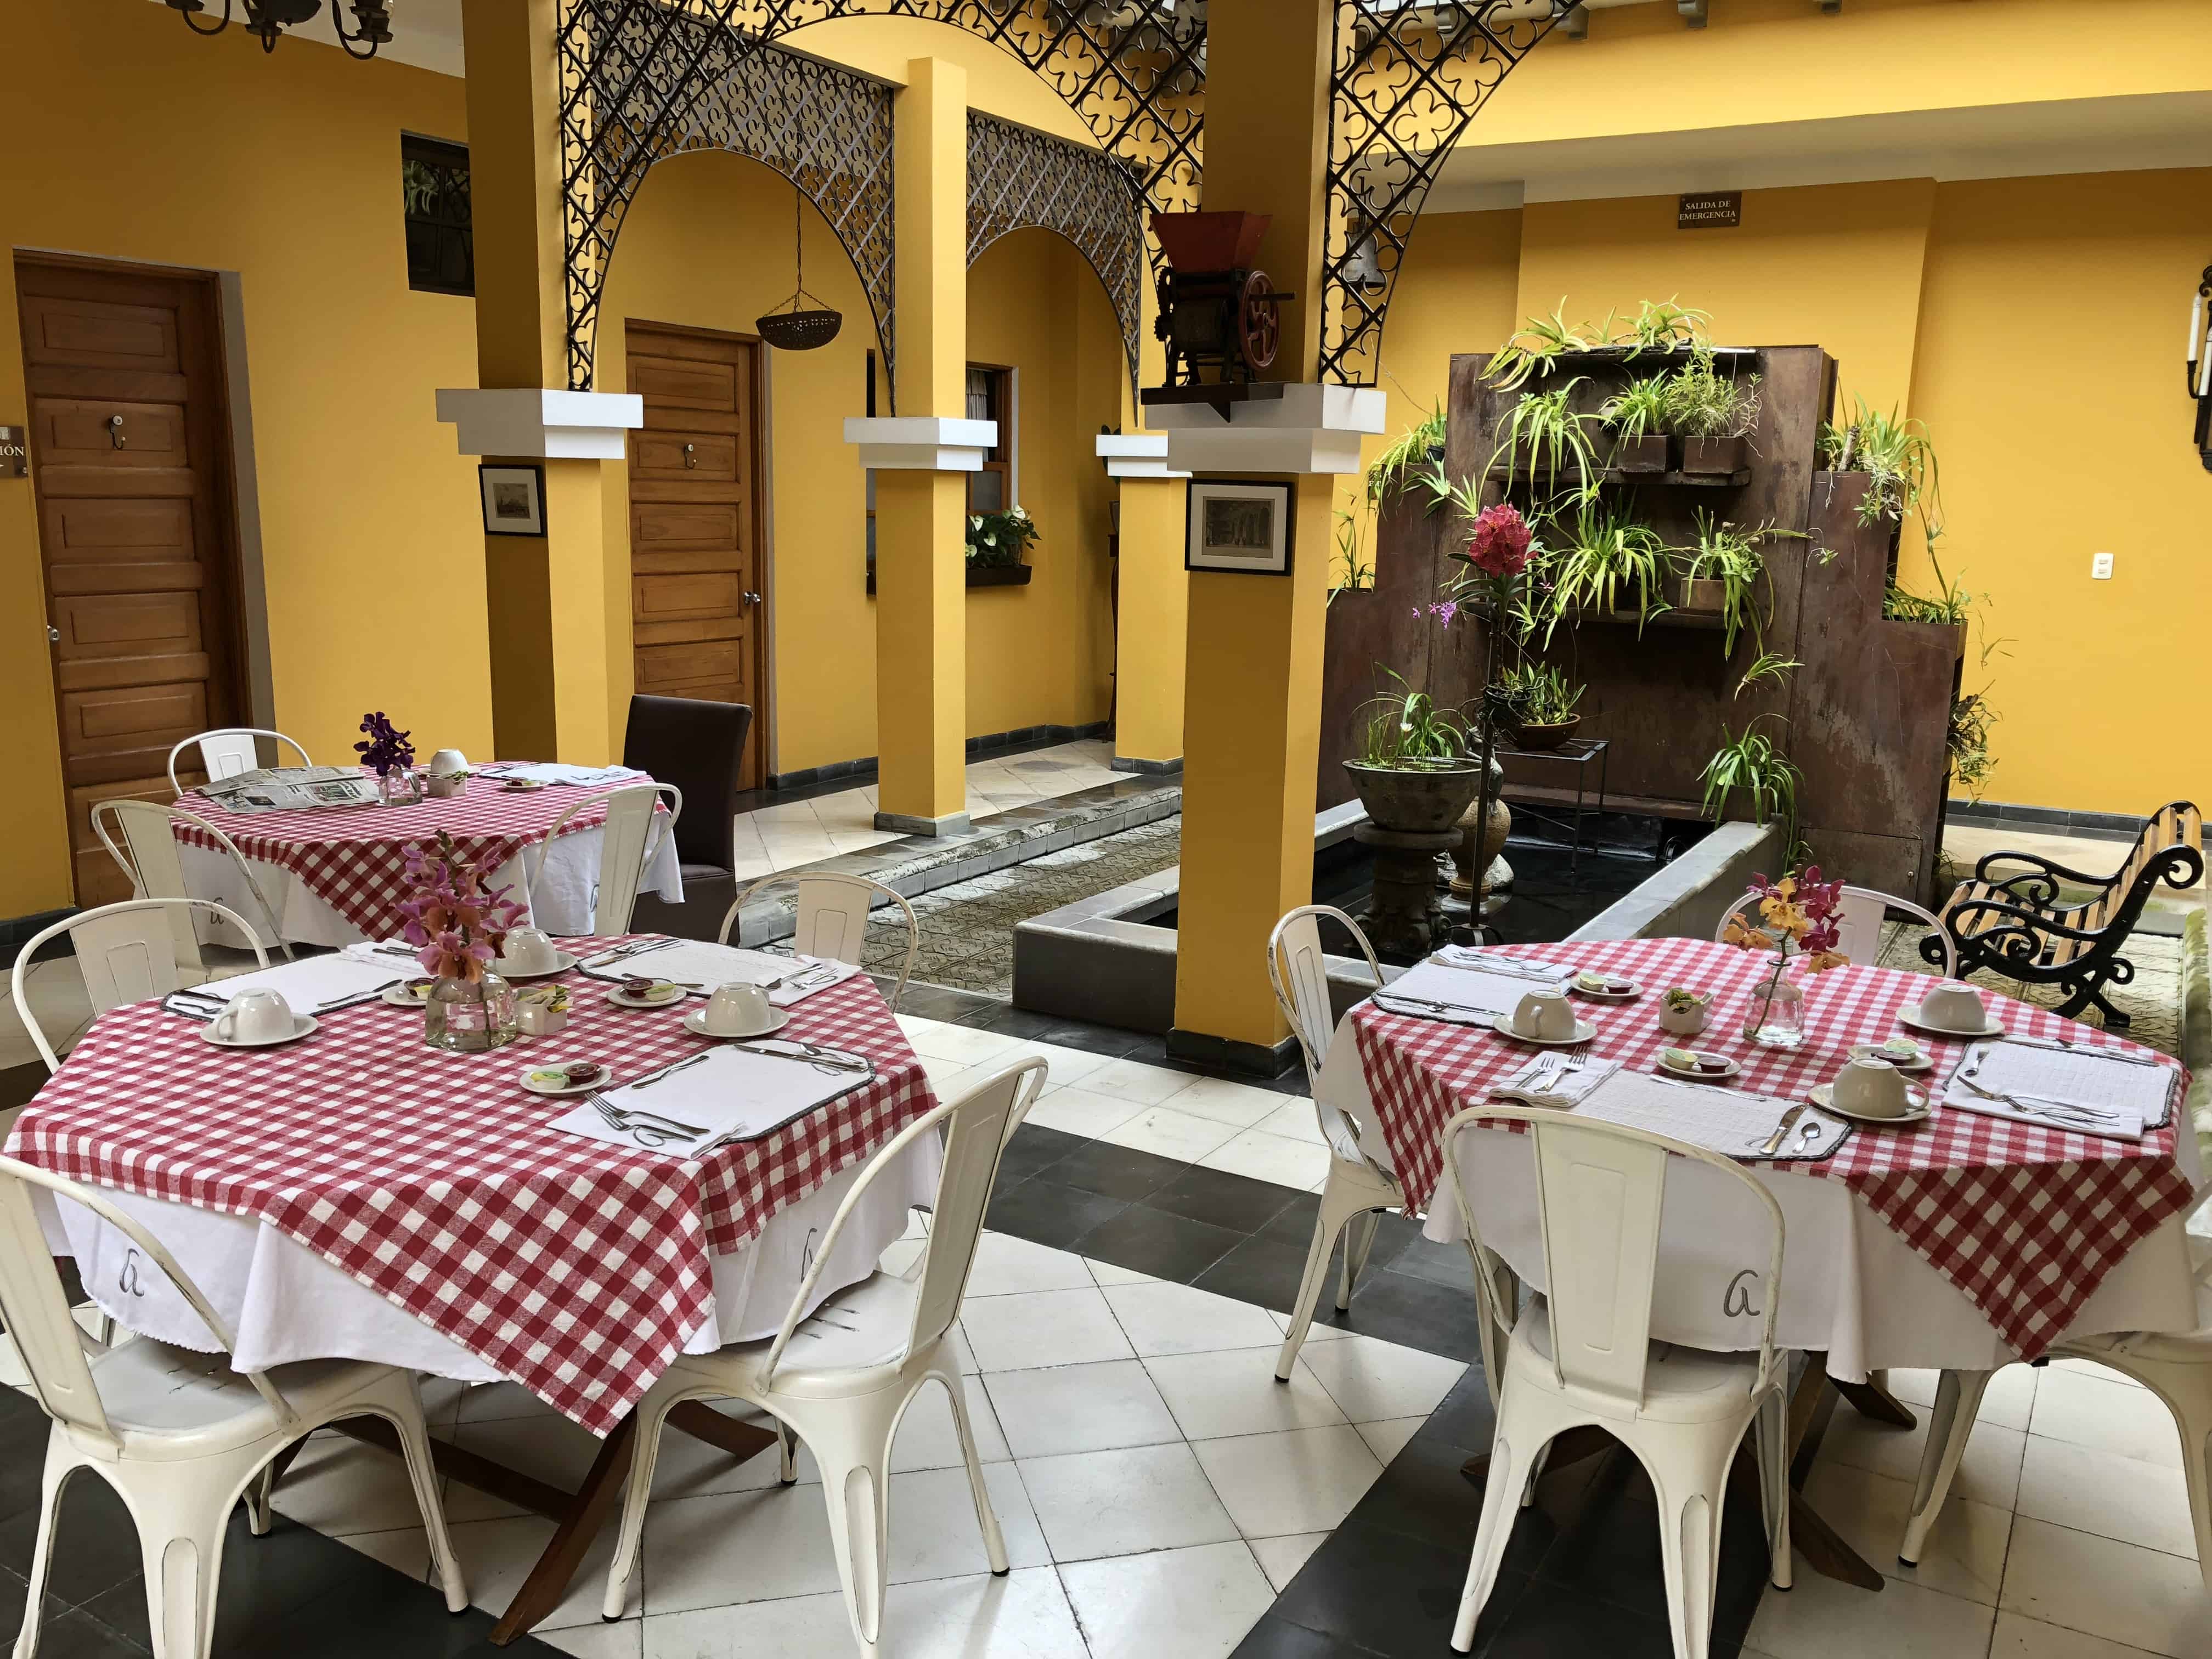 Breakfast area at Hotel Boutique Don Alfonso in Pereira, Risaralda, Colombia